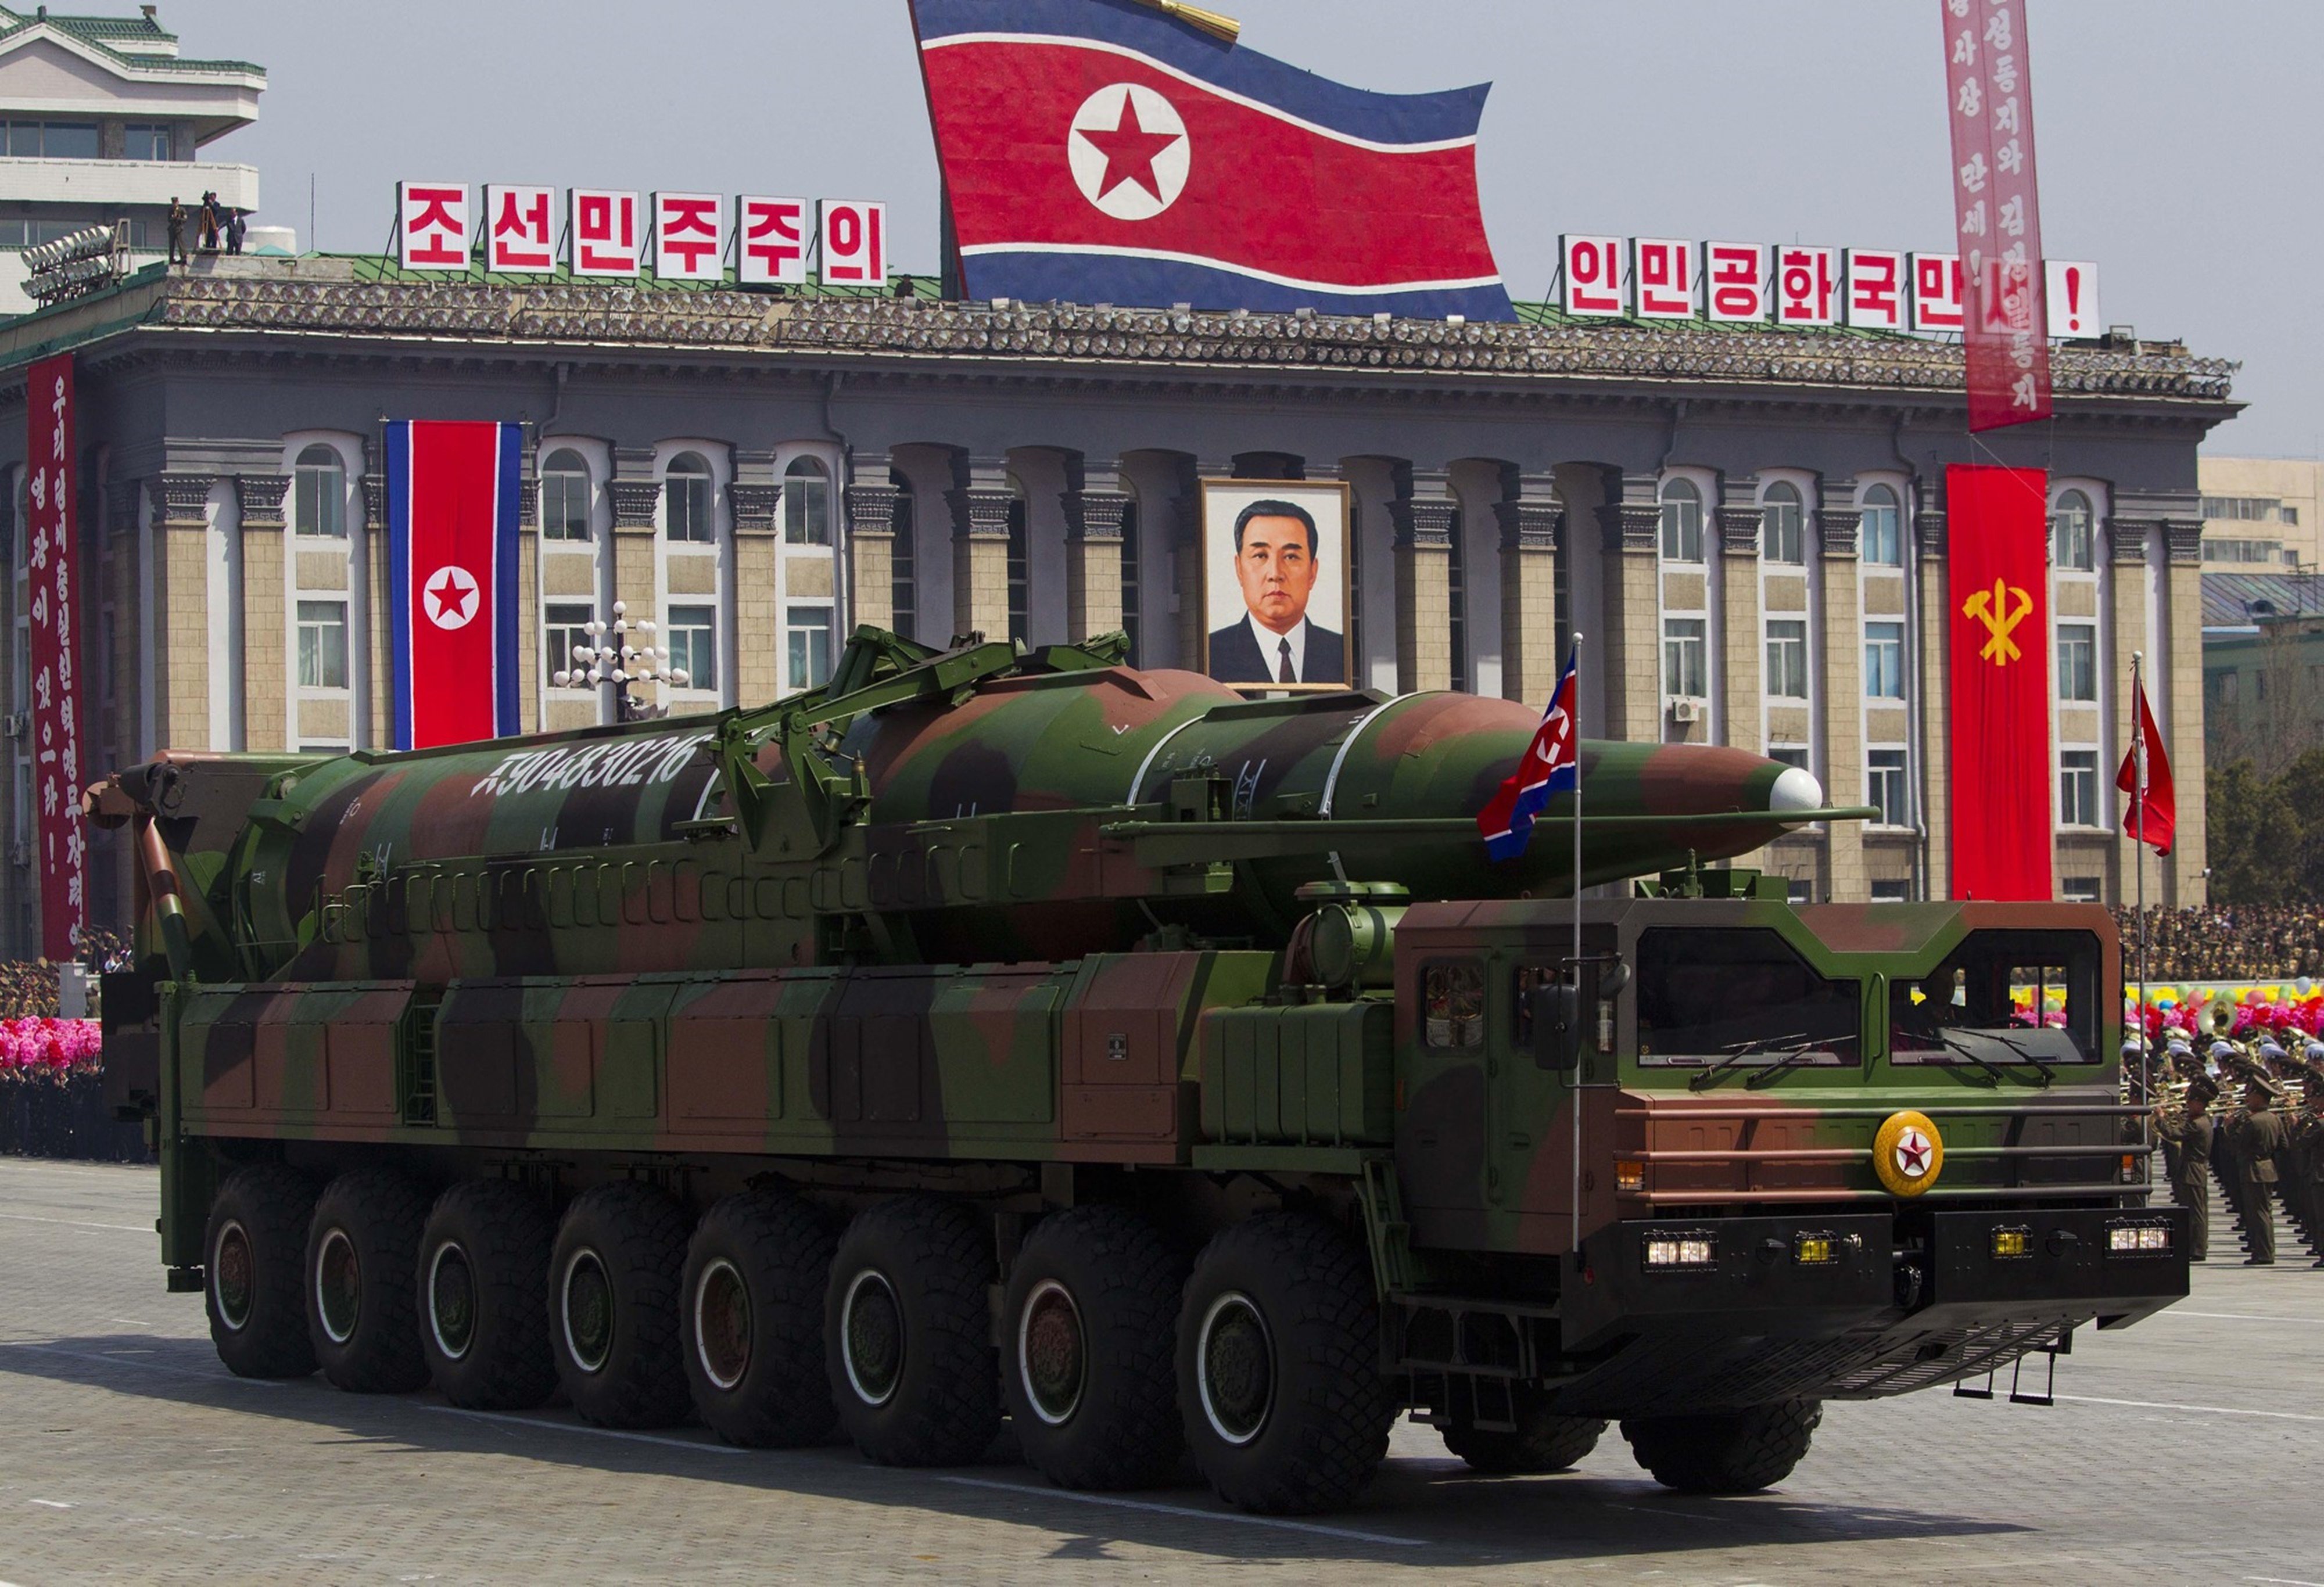 missile, North korea, Vehicle, Truck, Military, Parade, Wepons,  1 Wallpaper